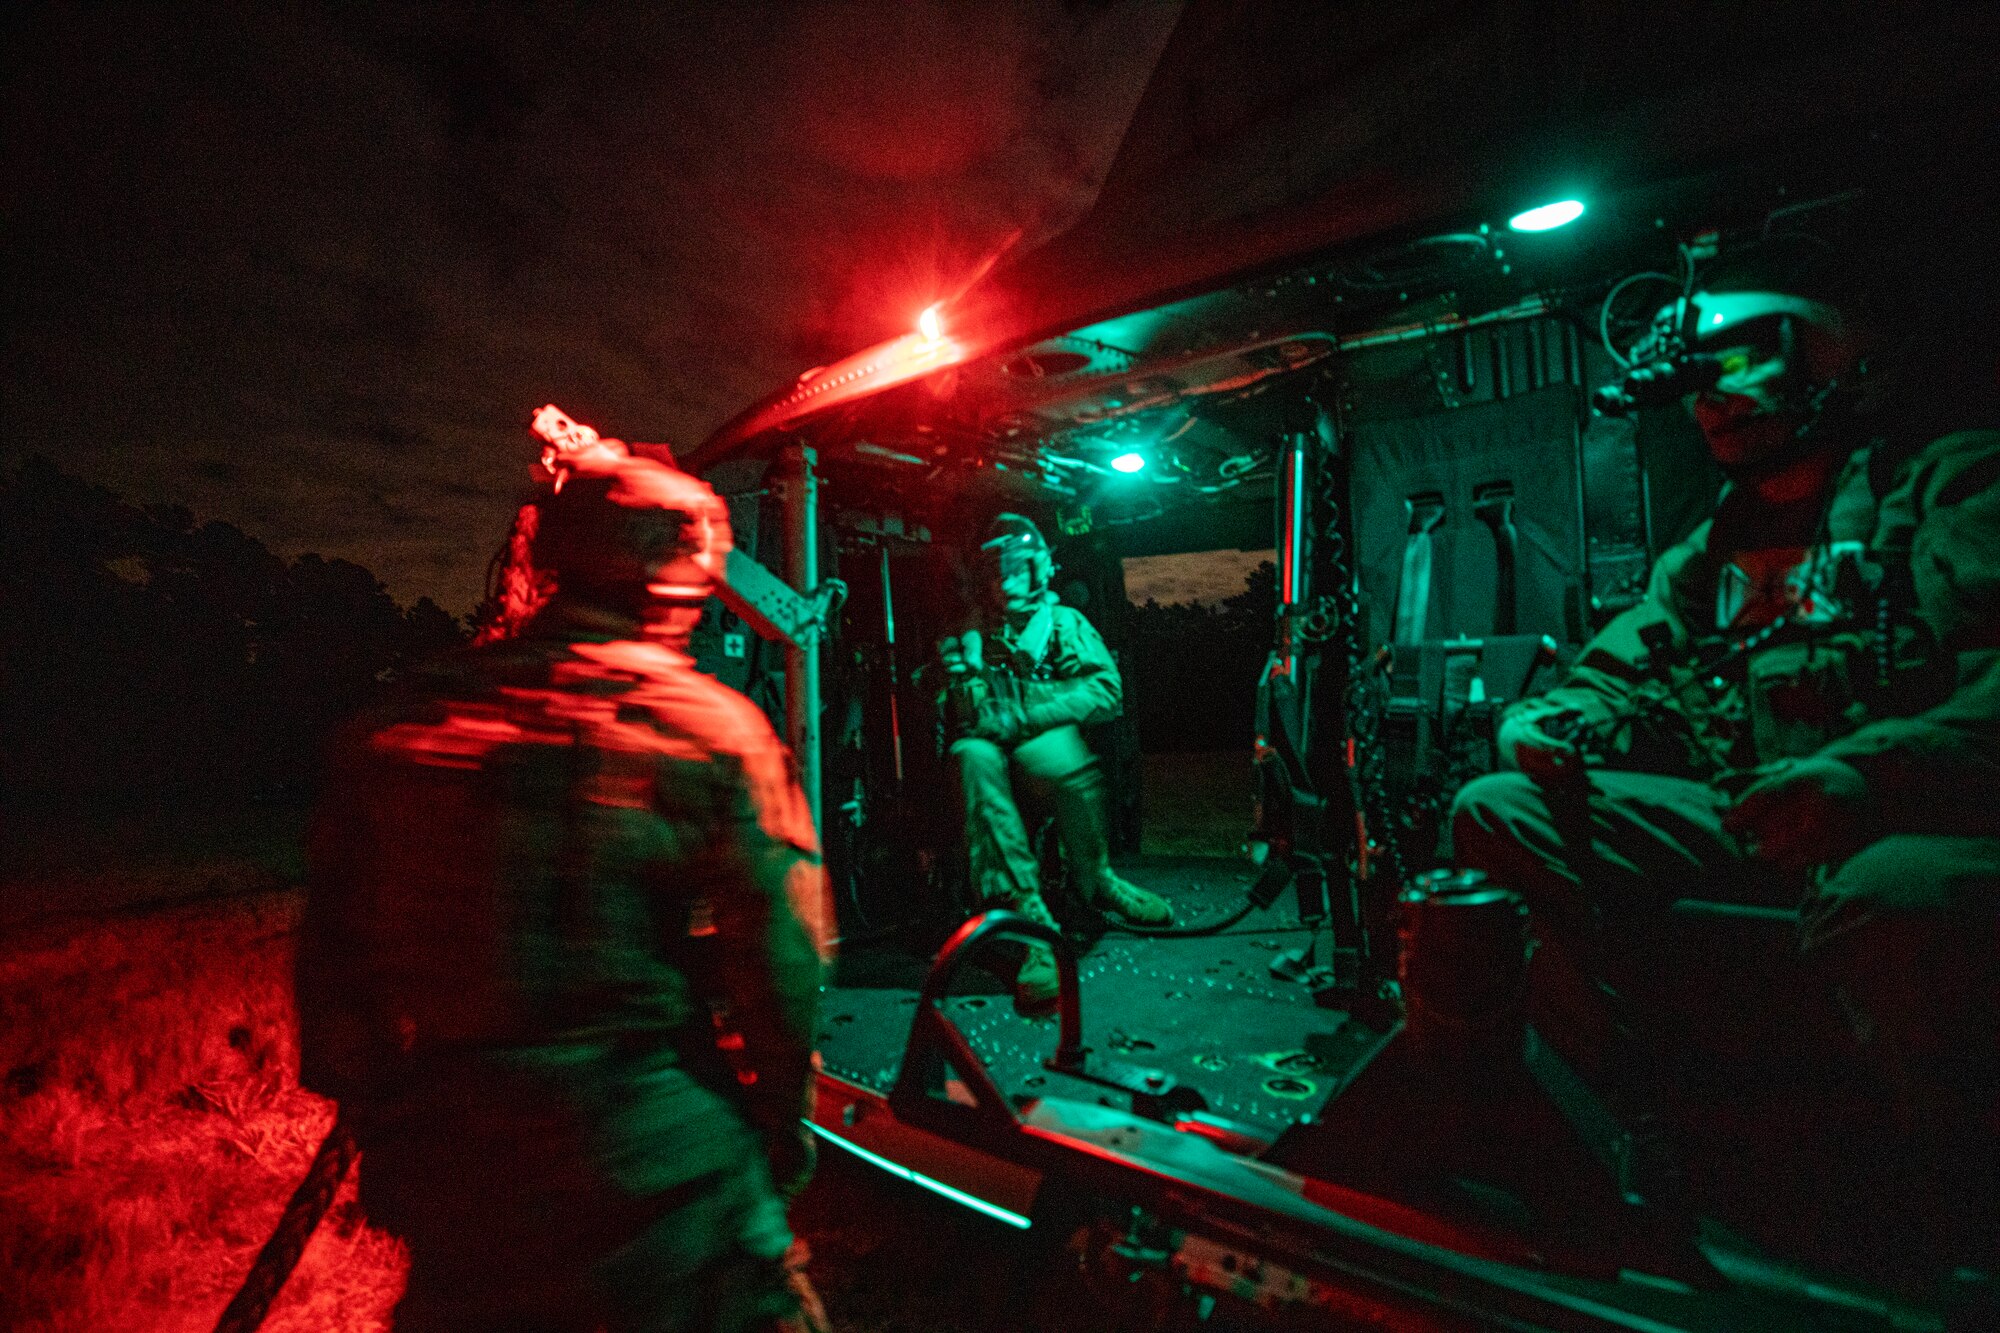 Airmen board a Marine Corps helicopter at night.